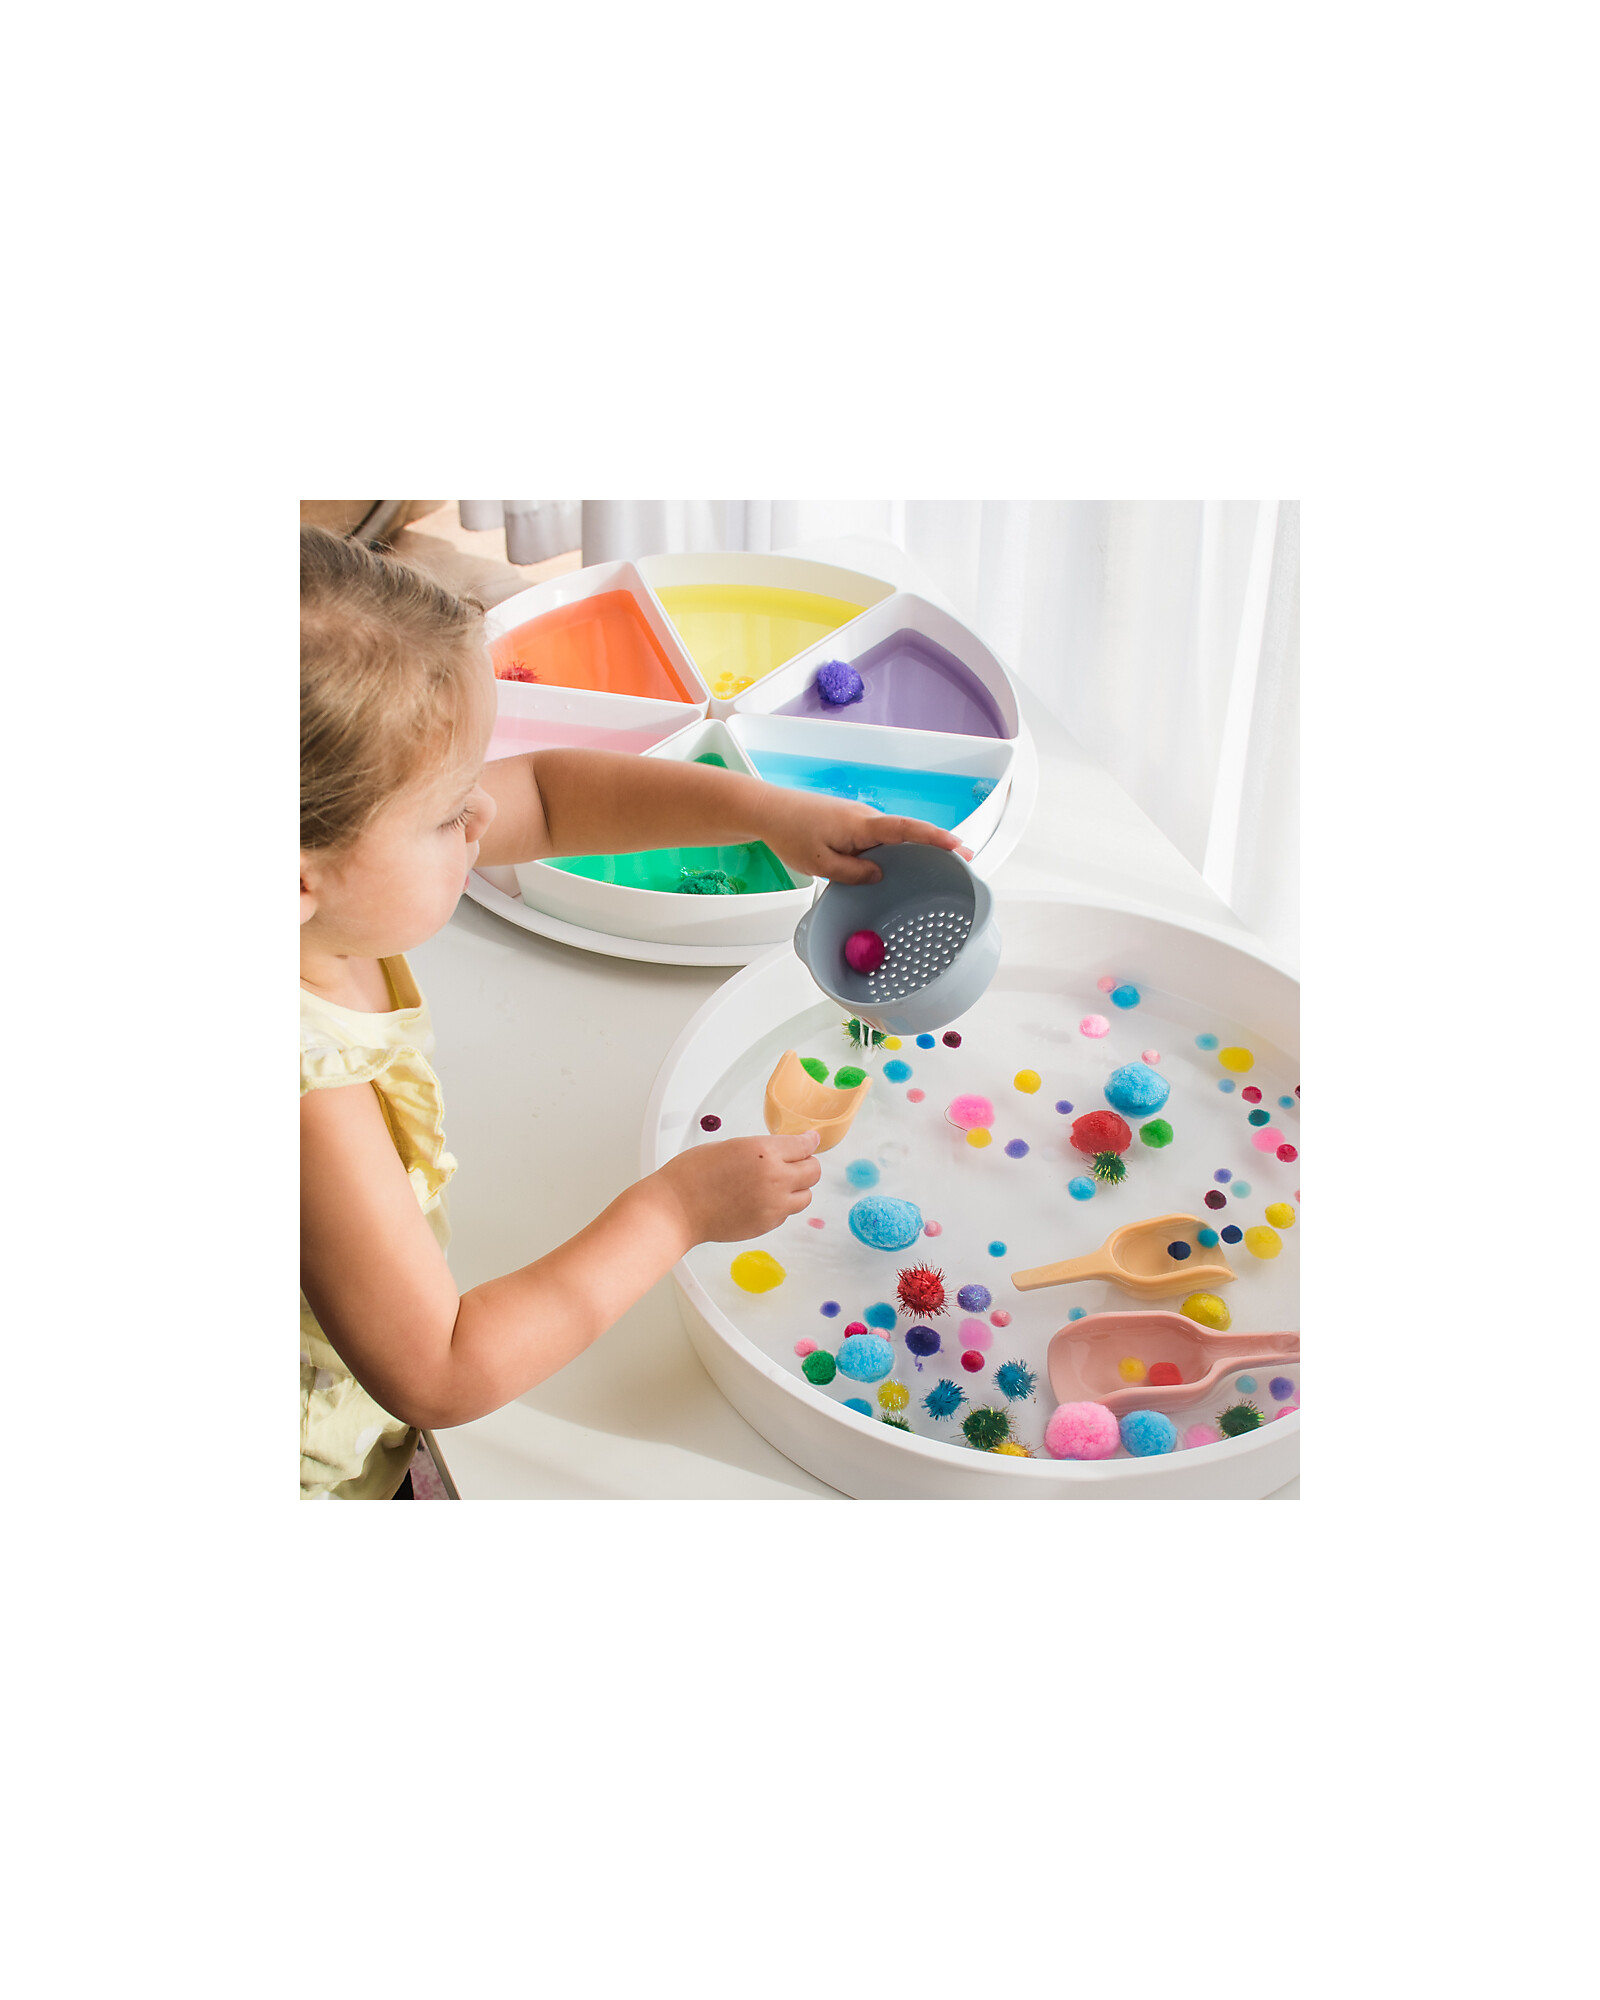 https://data.family-nation.com/imgprodotto/inspire-my-play-set-3-bowls-for-playtray-blue-green-100-food-grade-silicone-sensory-games__487042_zoom.jpg